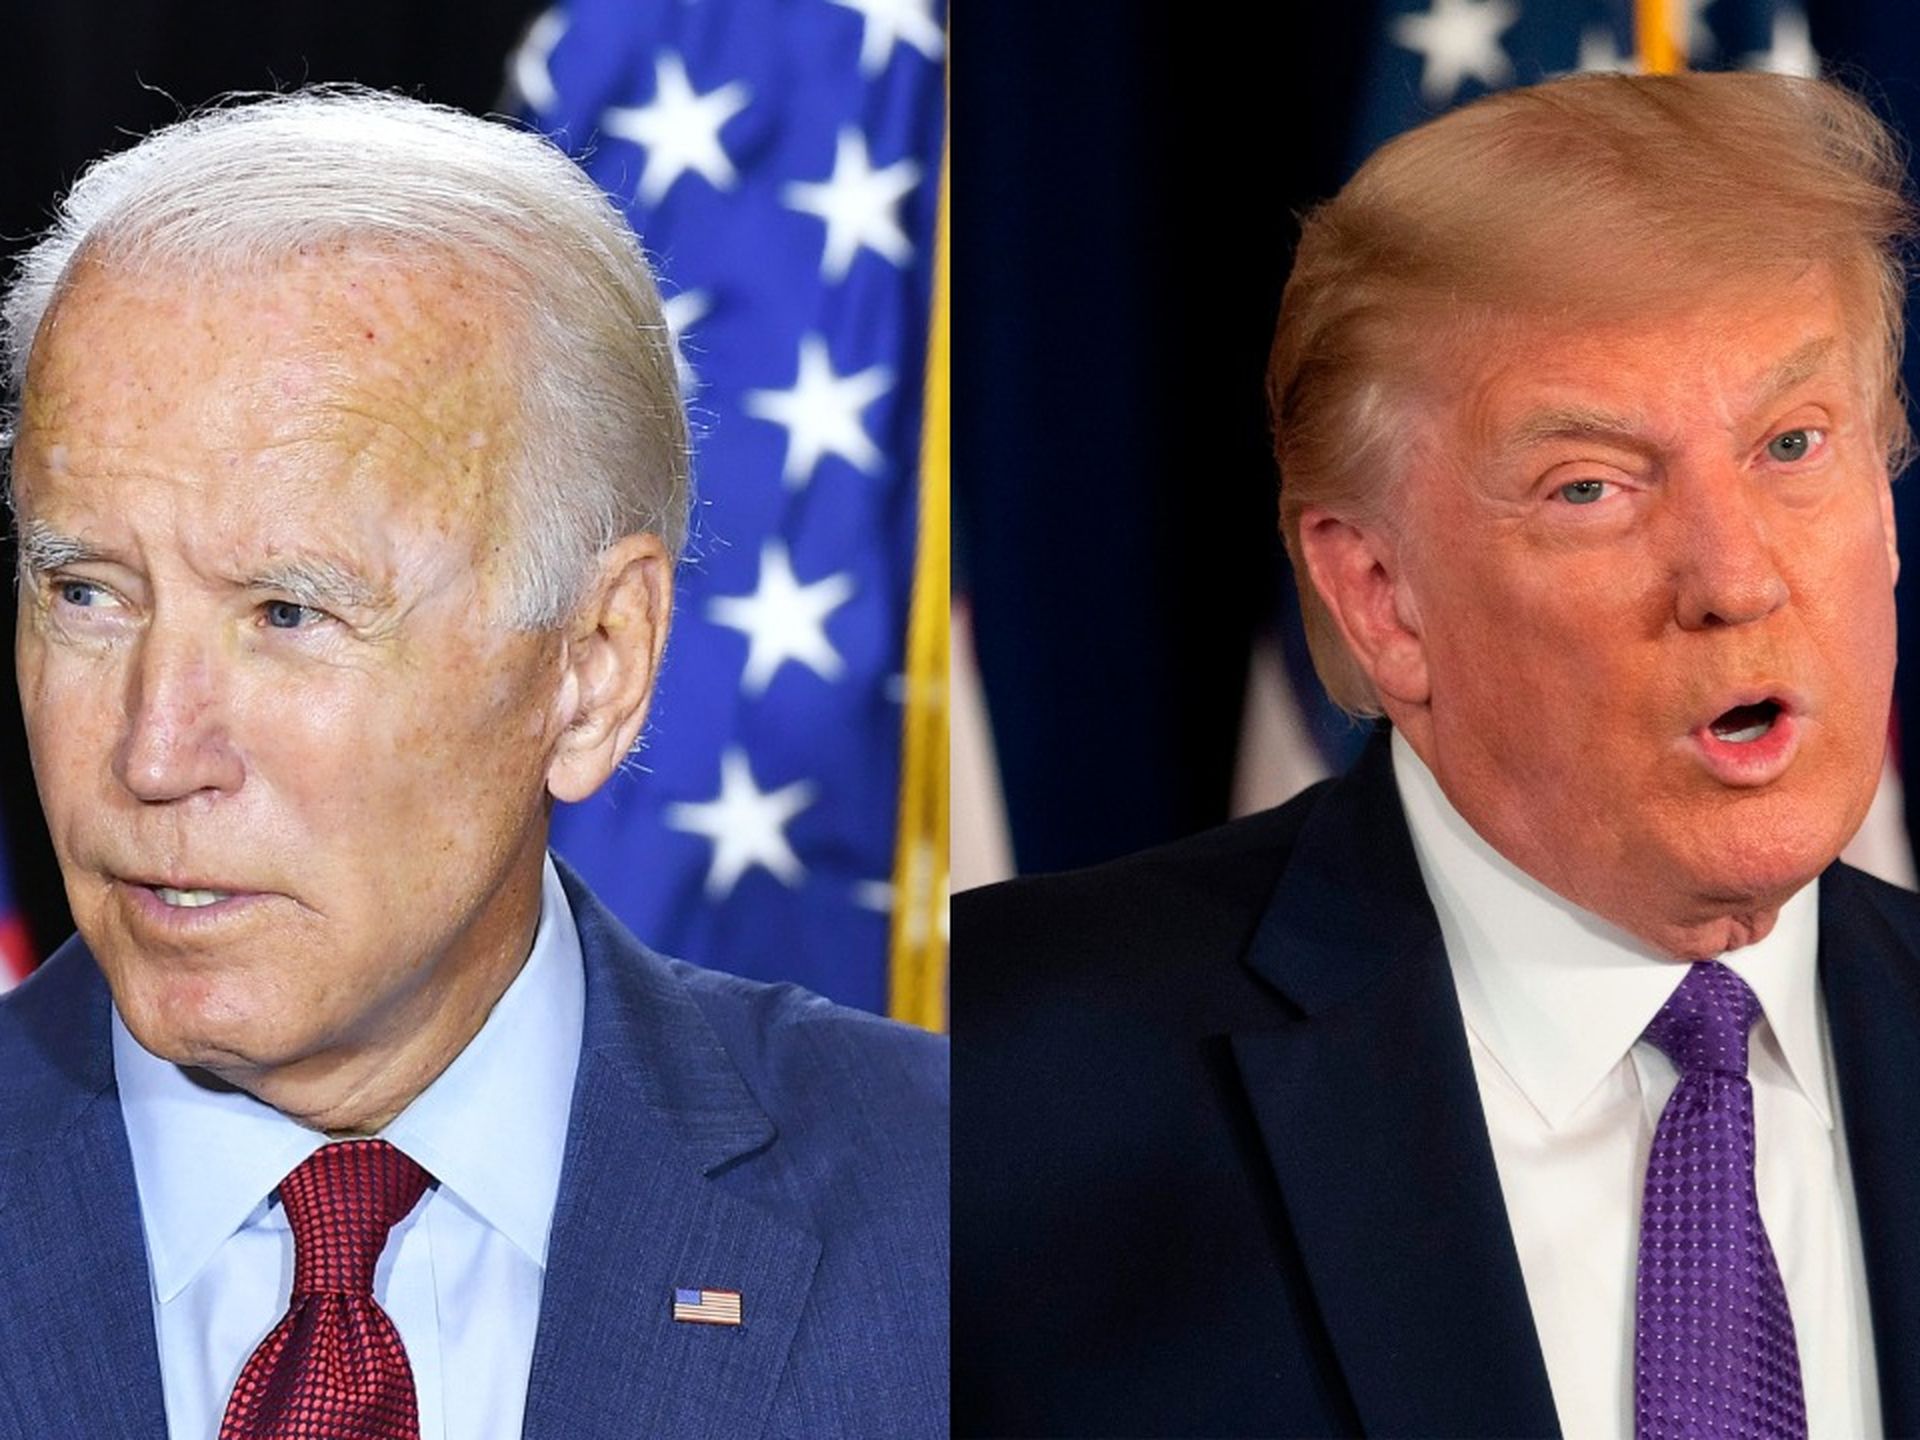 Poll: 58% of voters say is more "against" Trump than "for" Biden